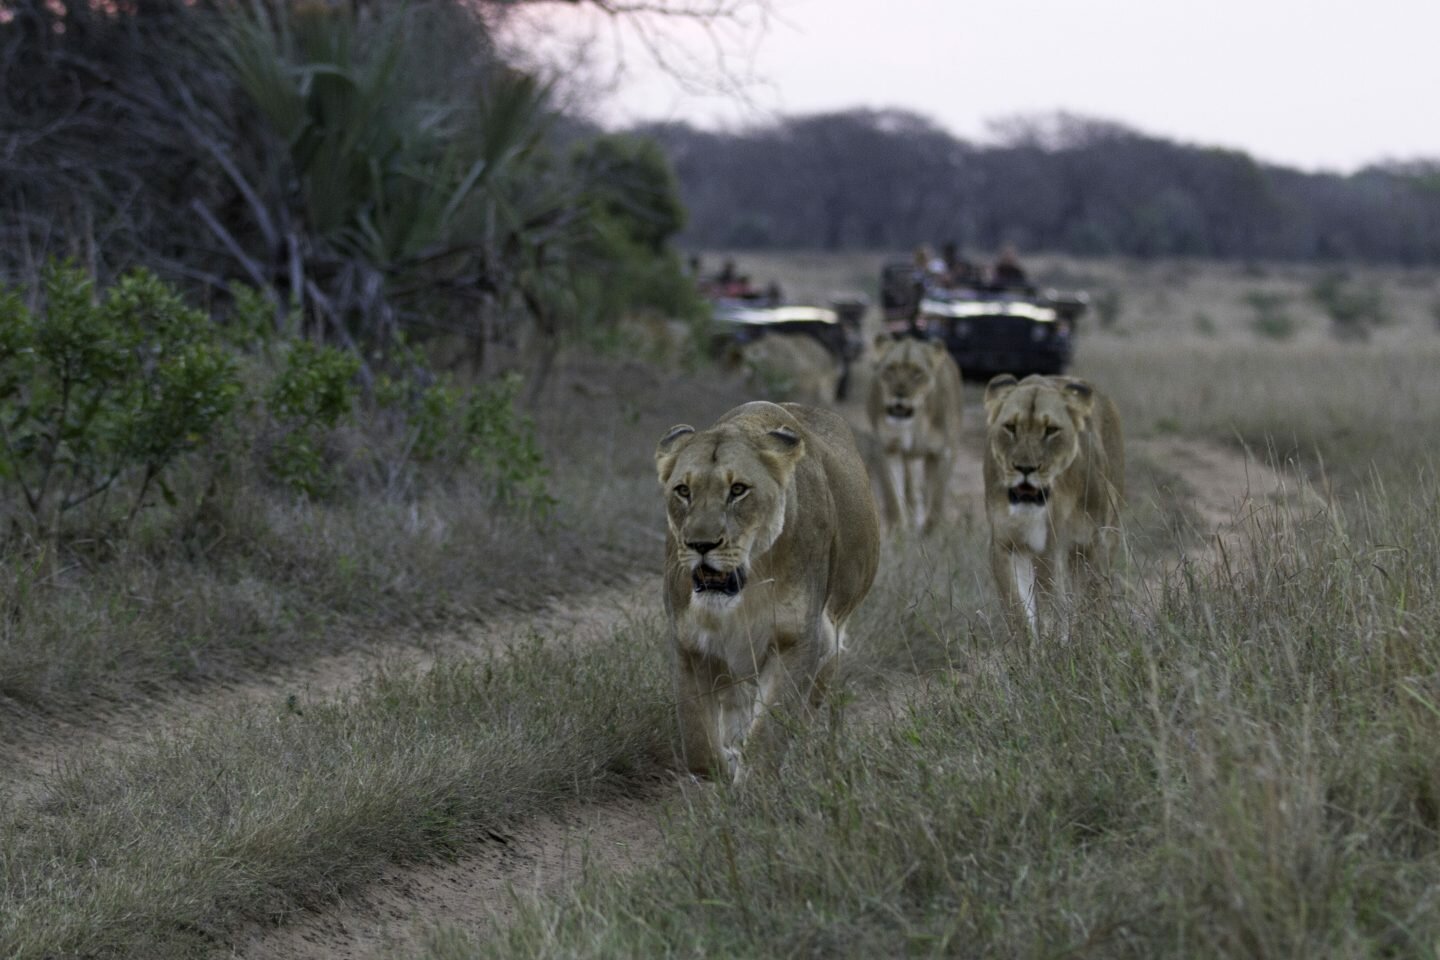 The Pandemic Might’ve Put Safari Tours On Hold, But Life In The Bush Goes On